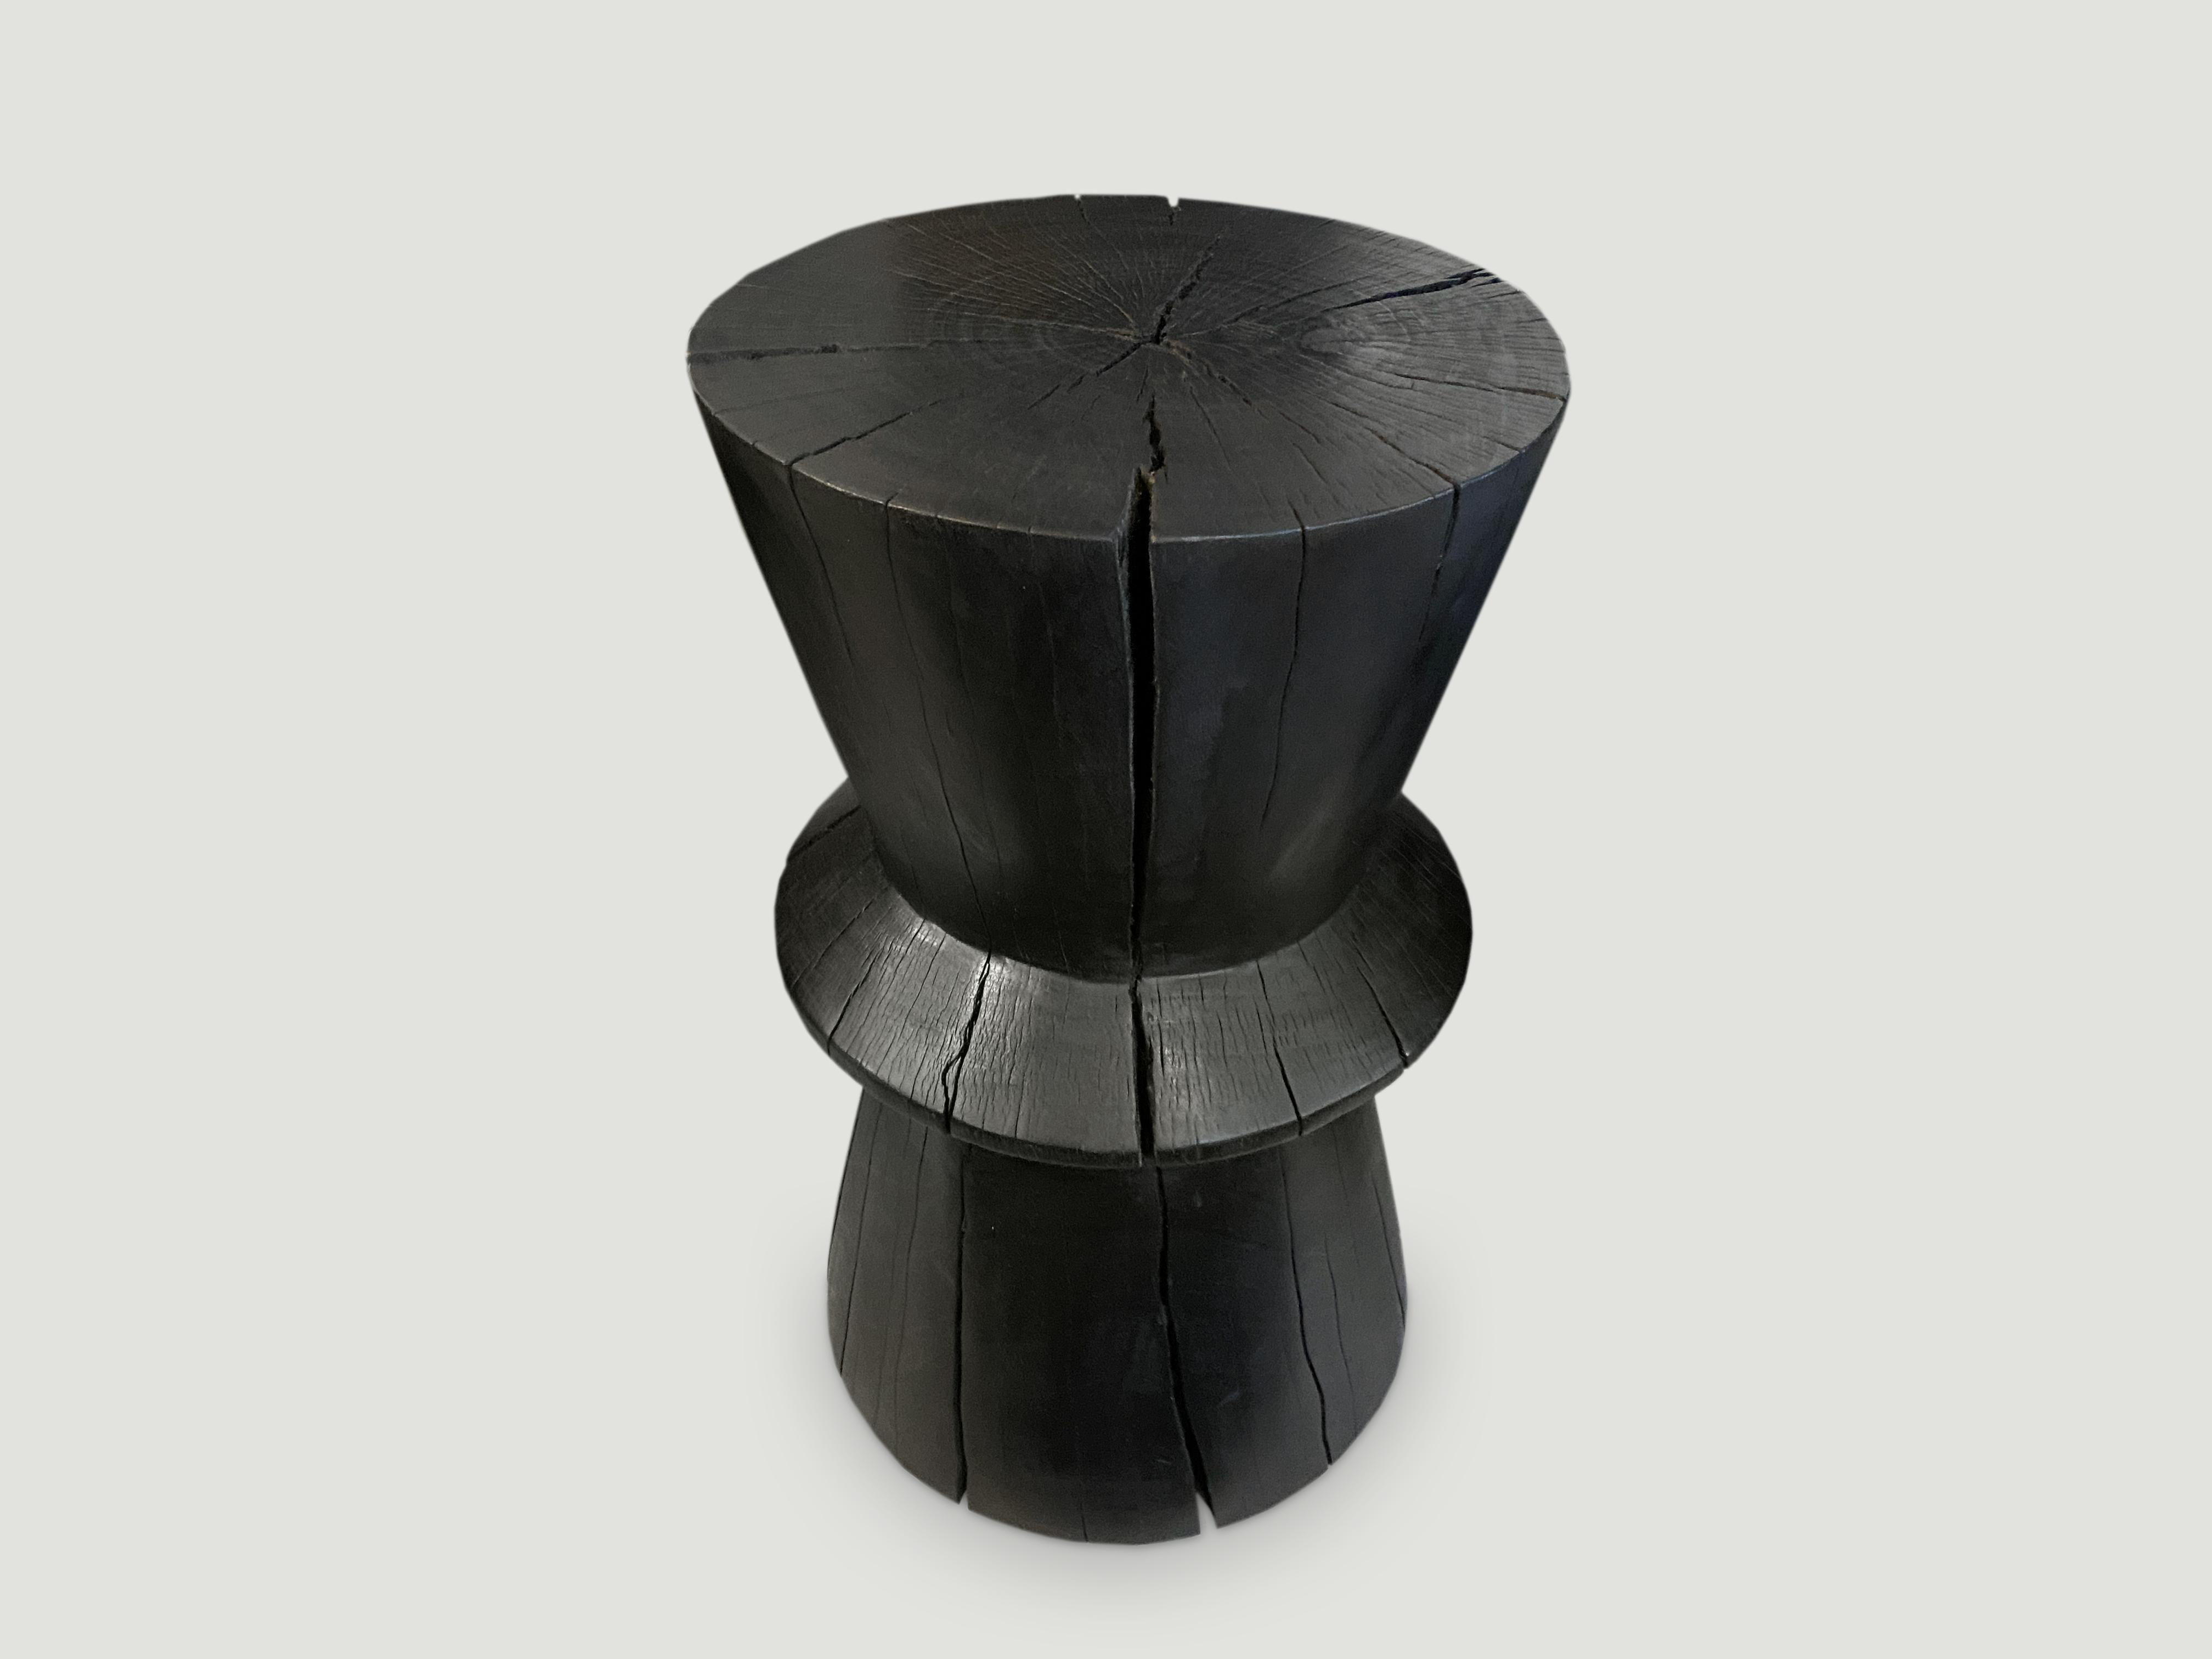 Hand carved side table made from reclaimed tamarind wood that celebrates cracks and crevices. We have a collection. The price reflects the one shown.

The Triple Burnt collection represents a unique line of modern furniture made from solid